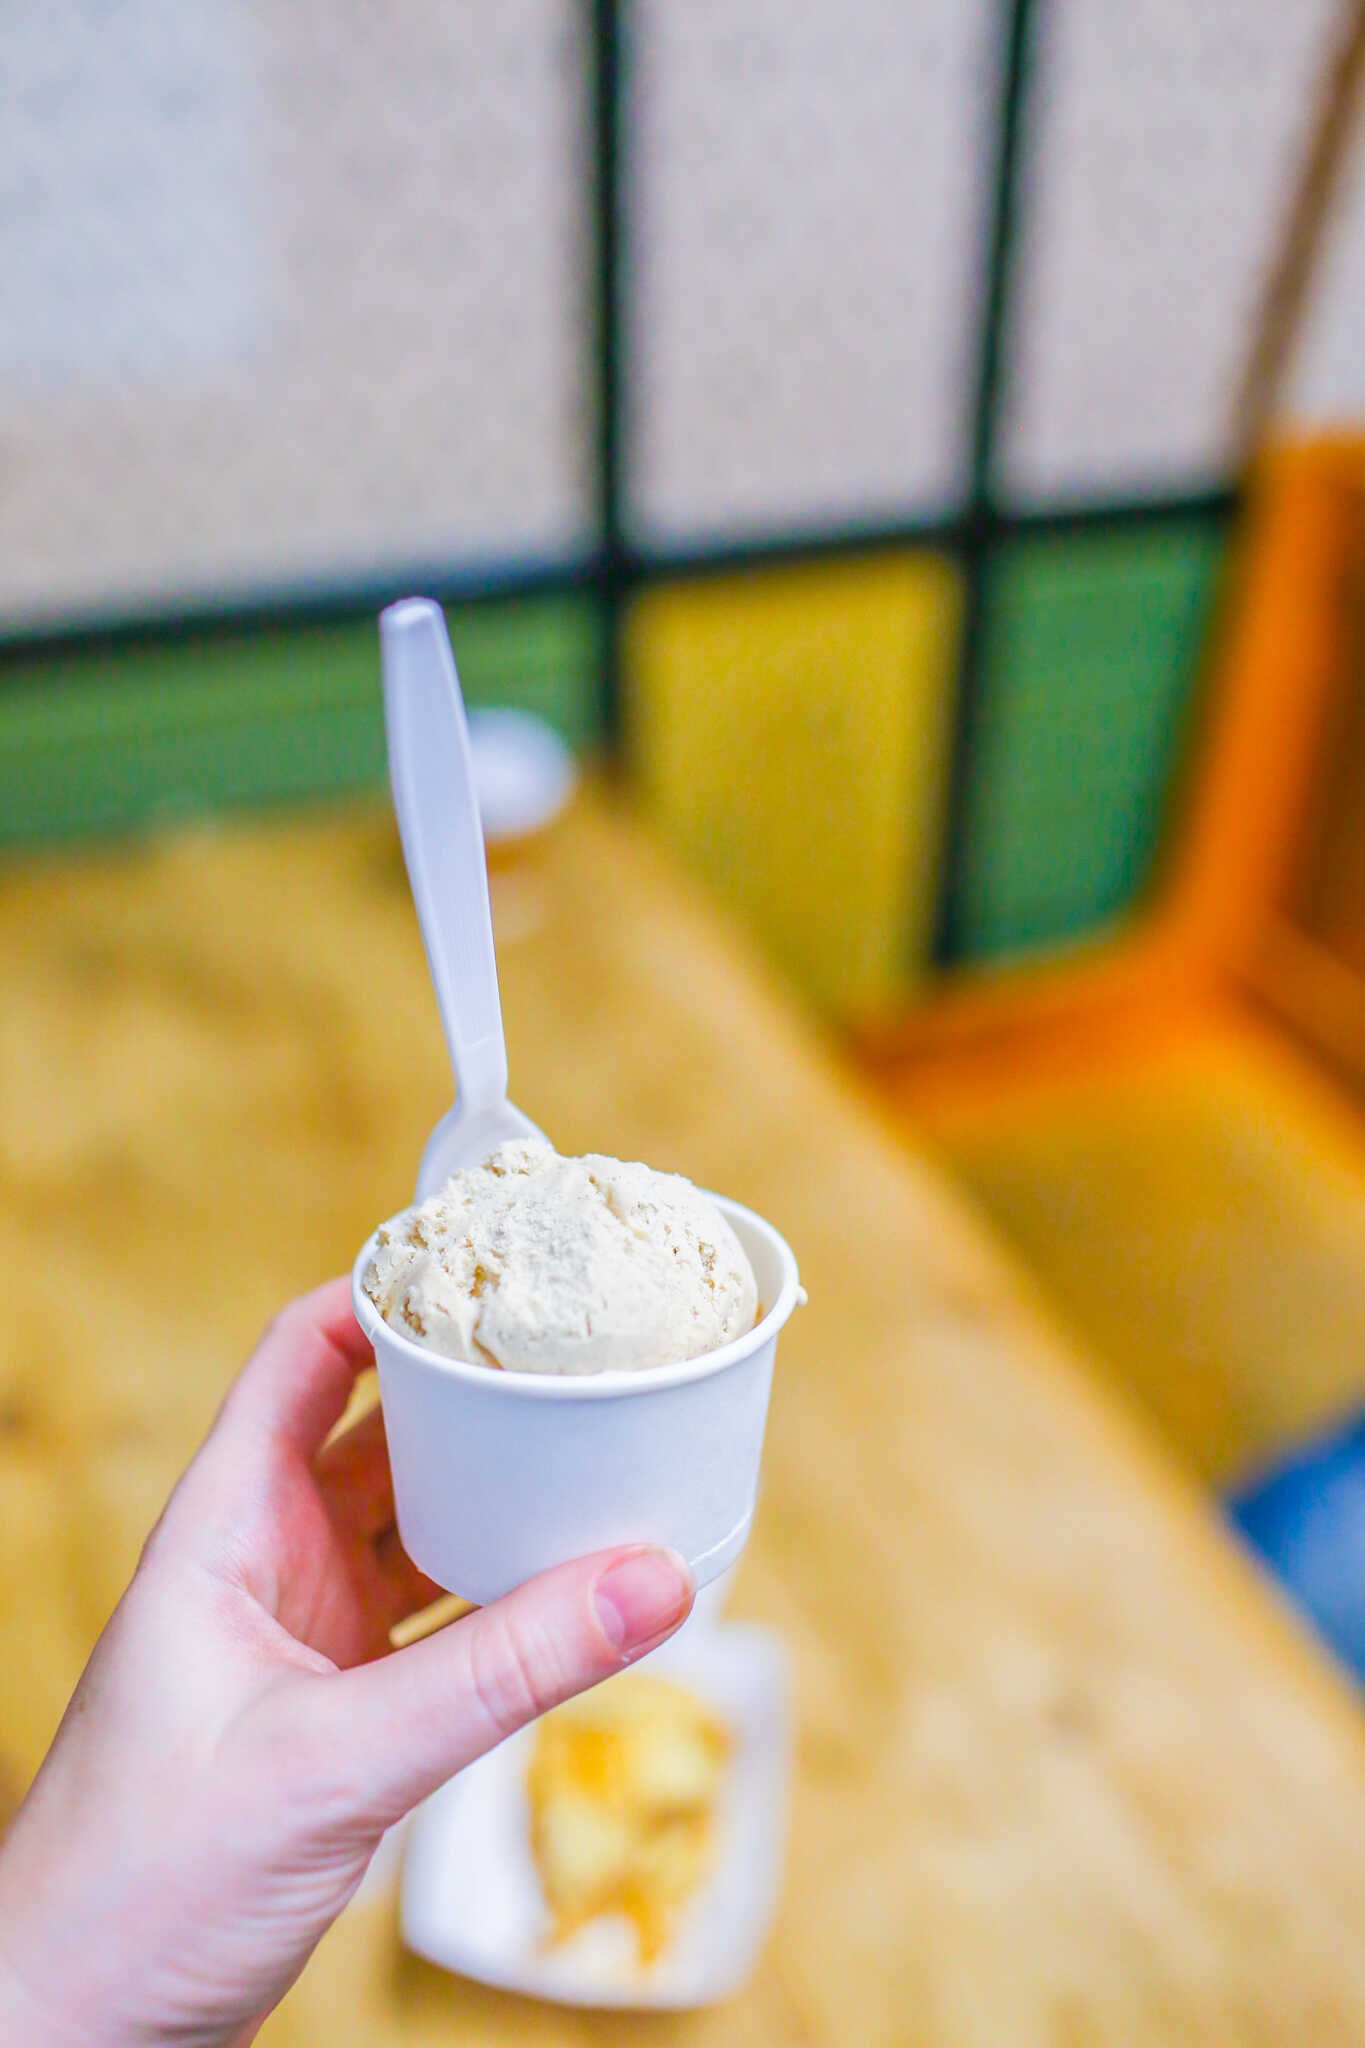 The Complete Travel Guide to Julian, California - Cinnamon ice cream from Mom’s Pie House.